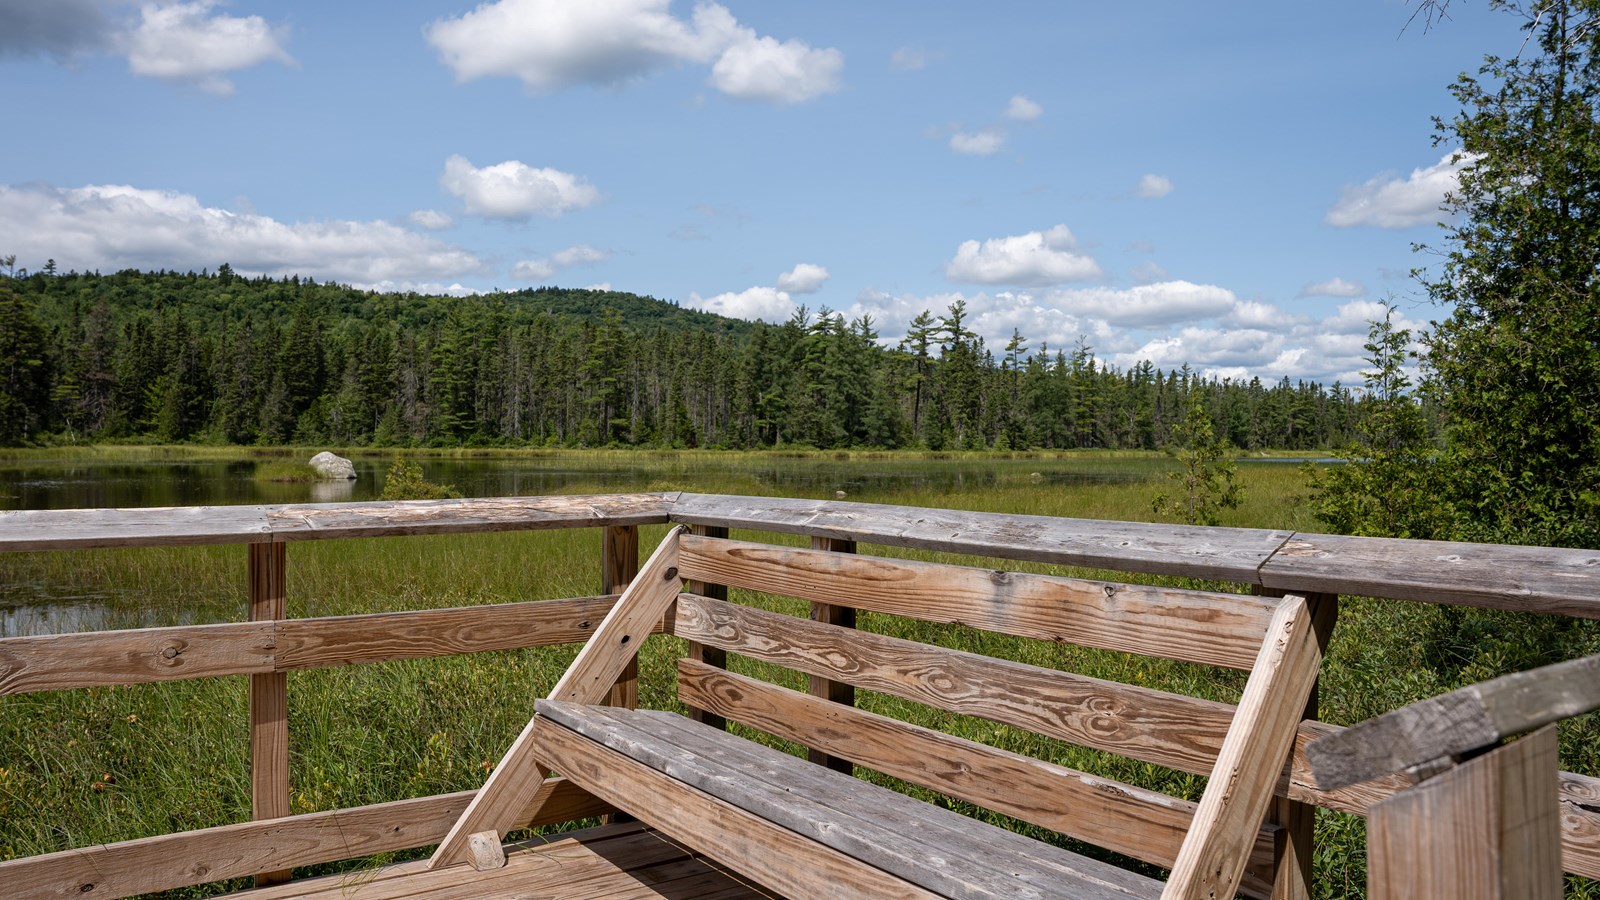 A wooden viewing platform with a bench over a grassy pond. Cloudy blue sky and mountains behind it.